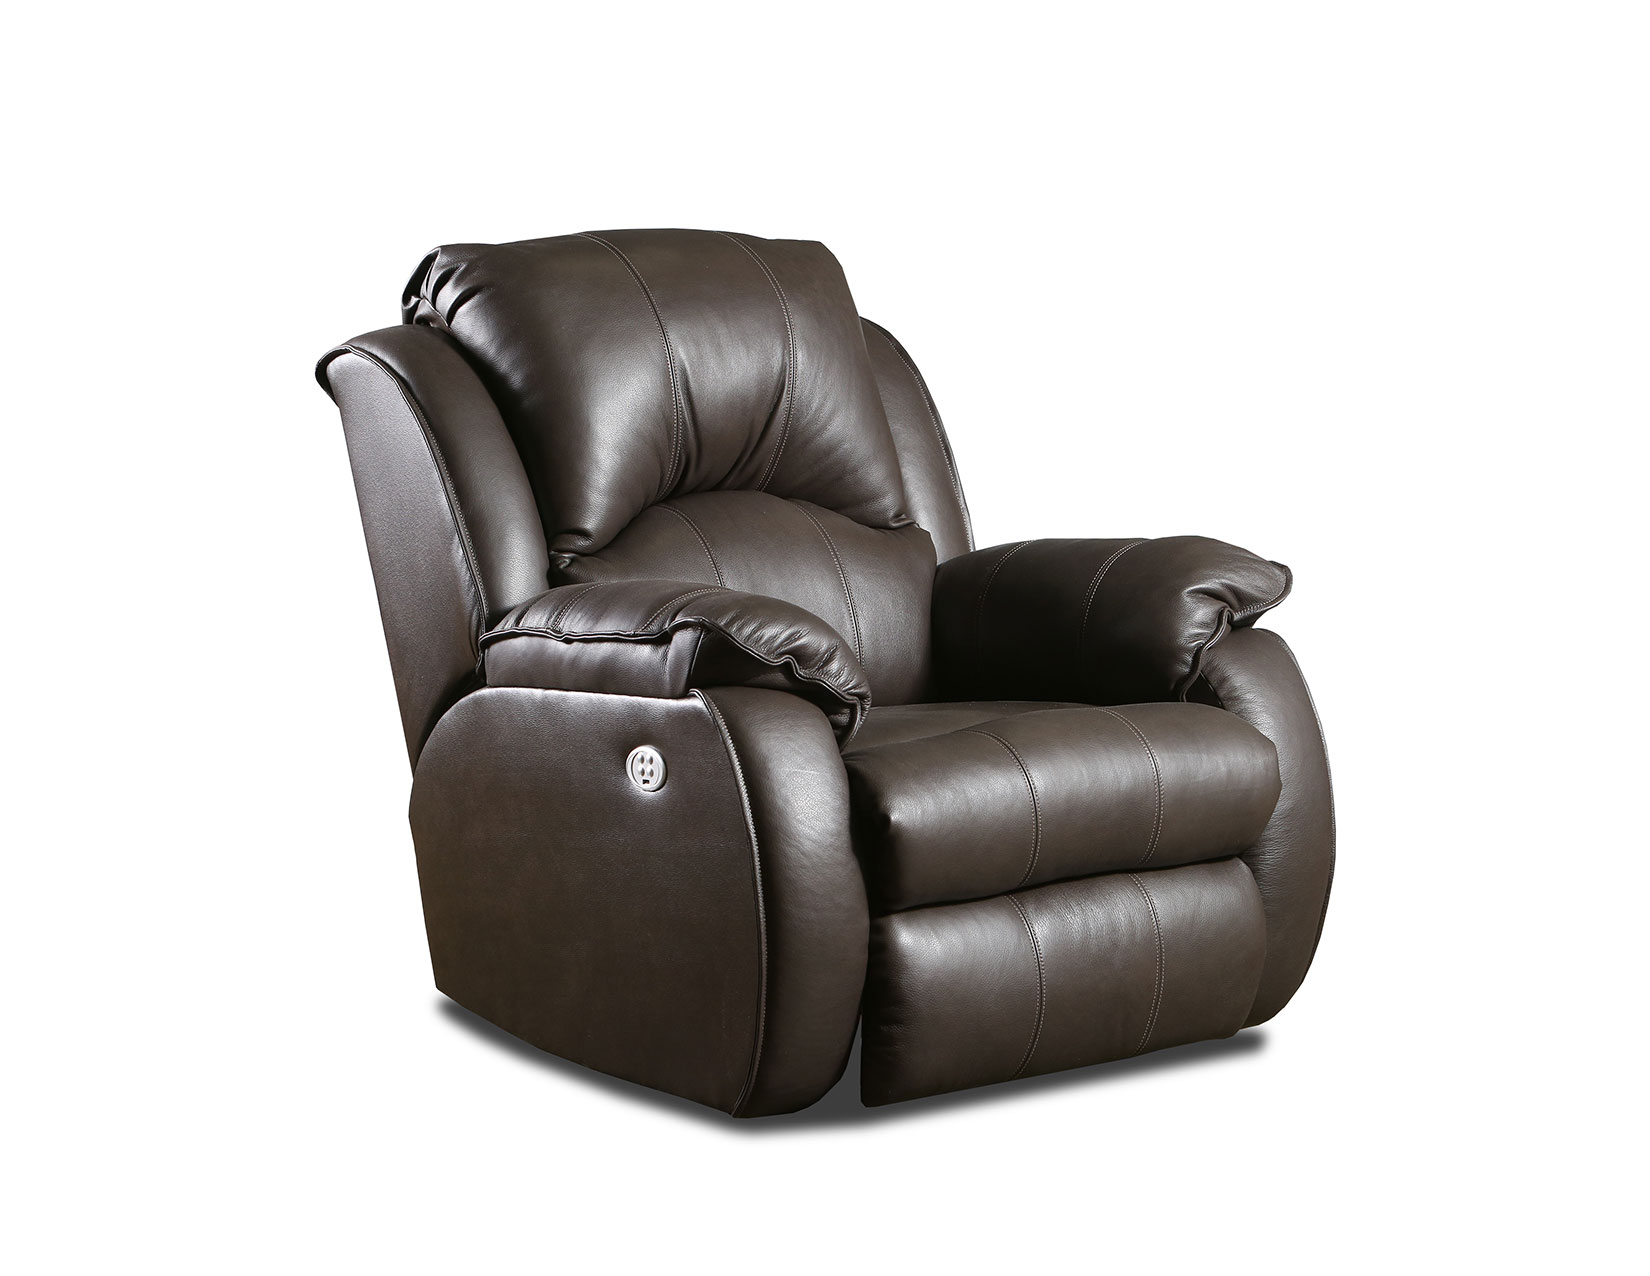 1175 Cagney Recliner Image